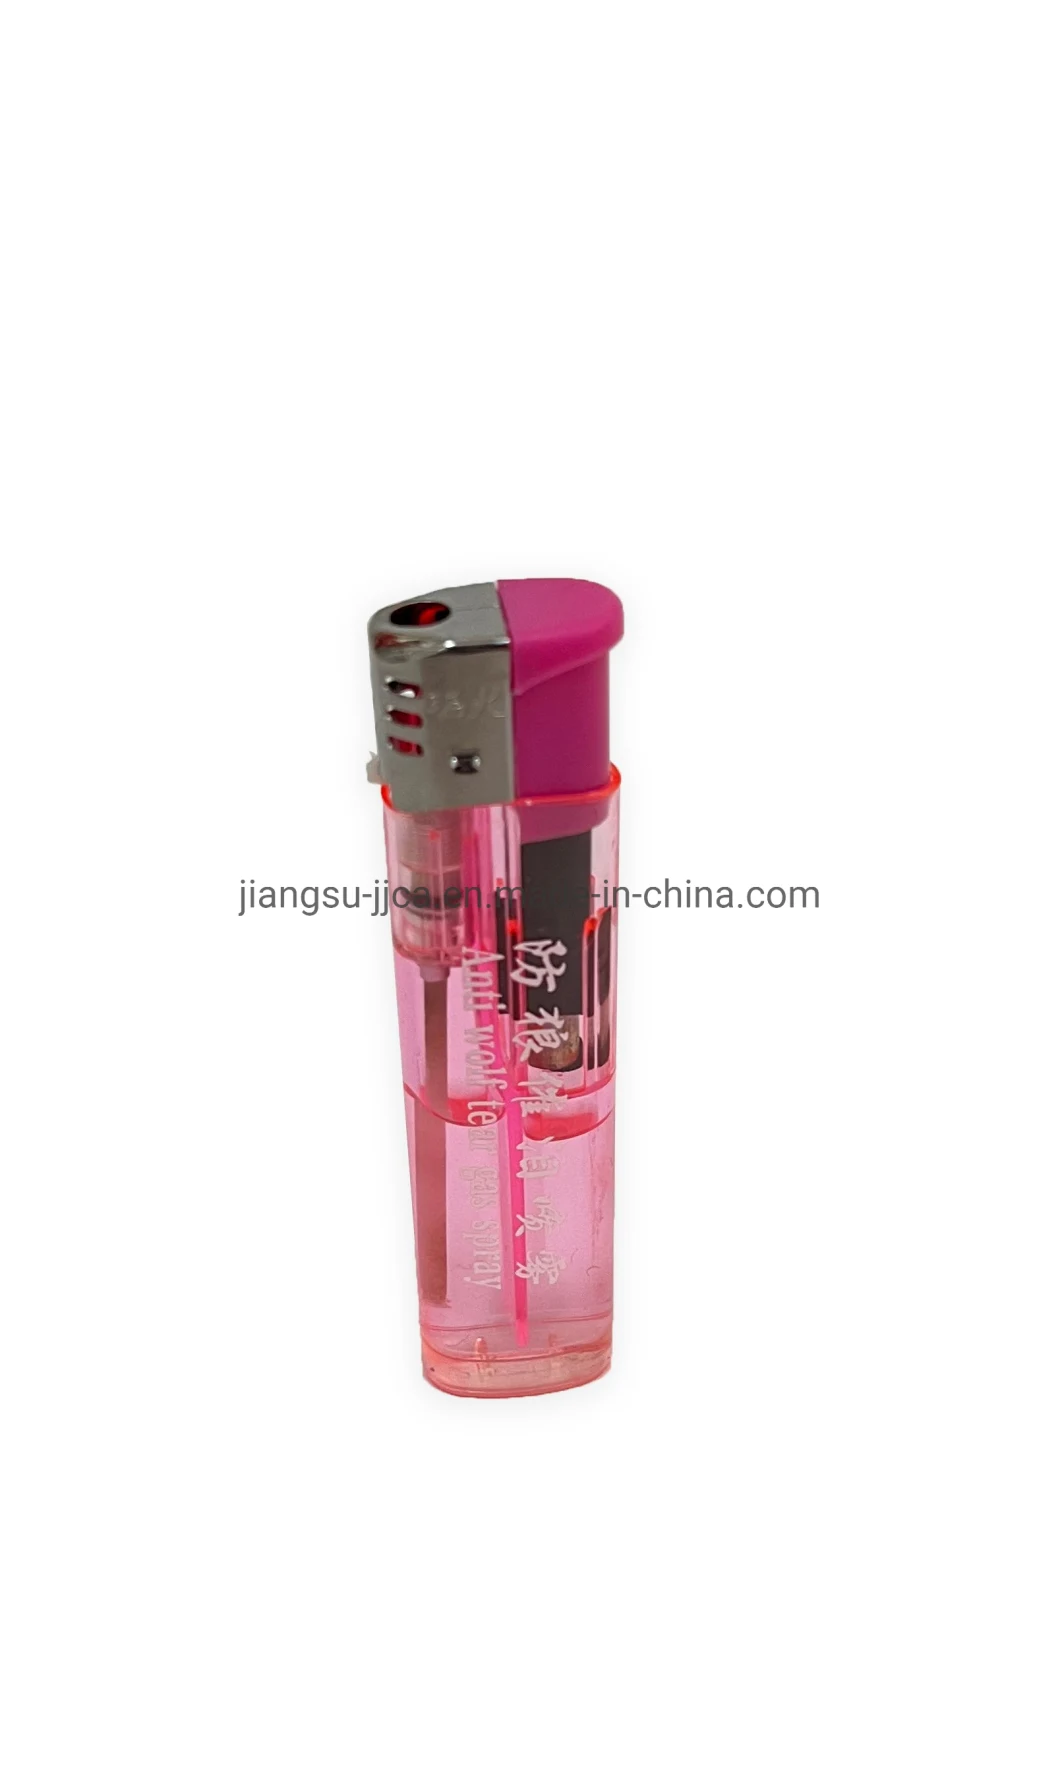 2022 20ml Wholesale Self Defense Lighter Pepper Spray with High Quality